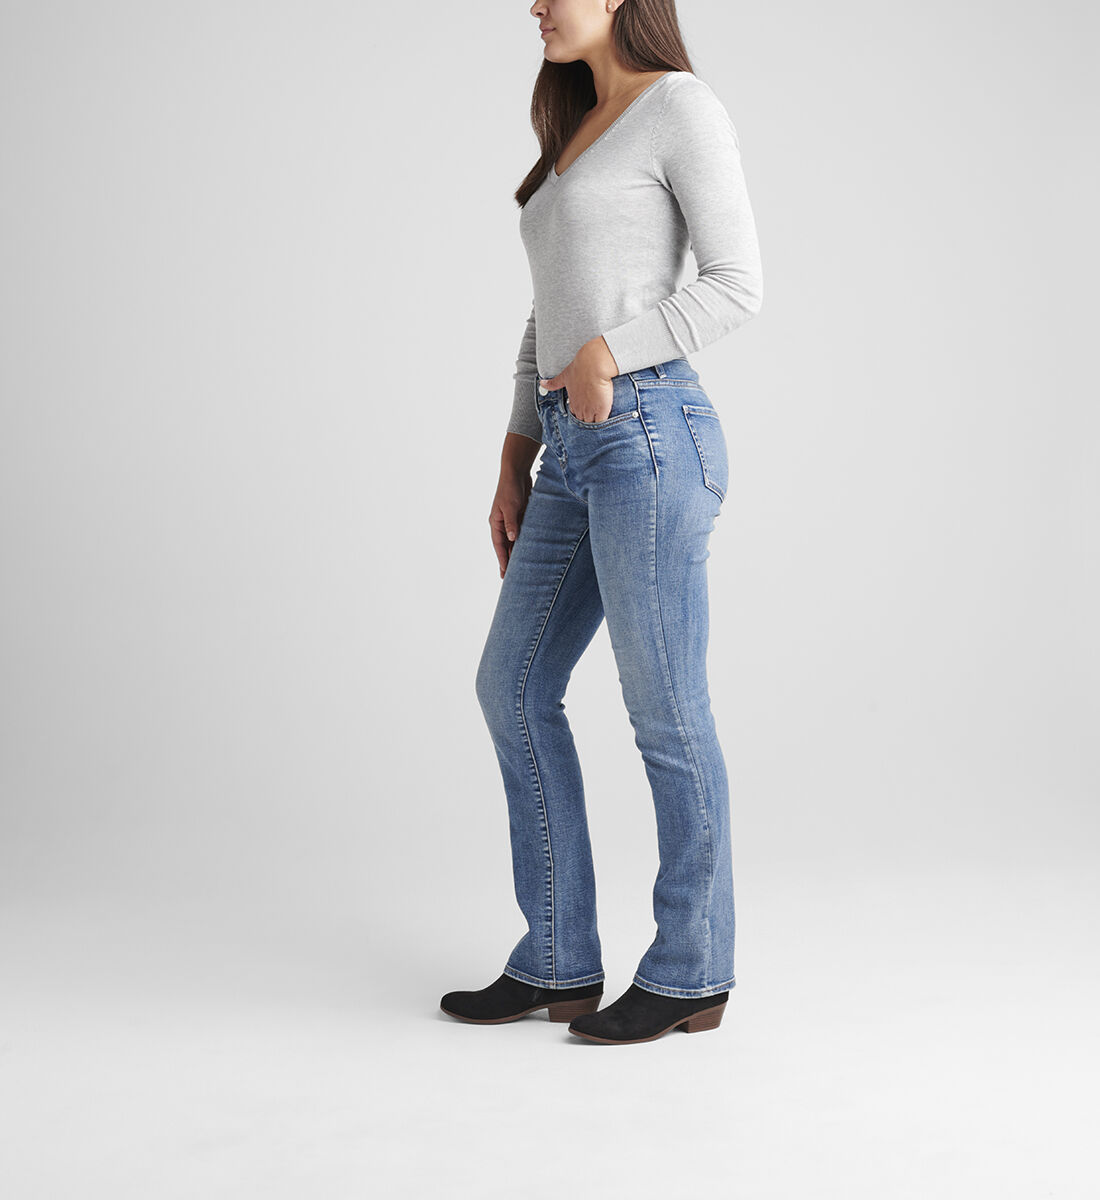 Eloise Mid Rise Bootcut Jeans Side